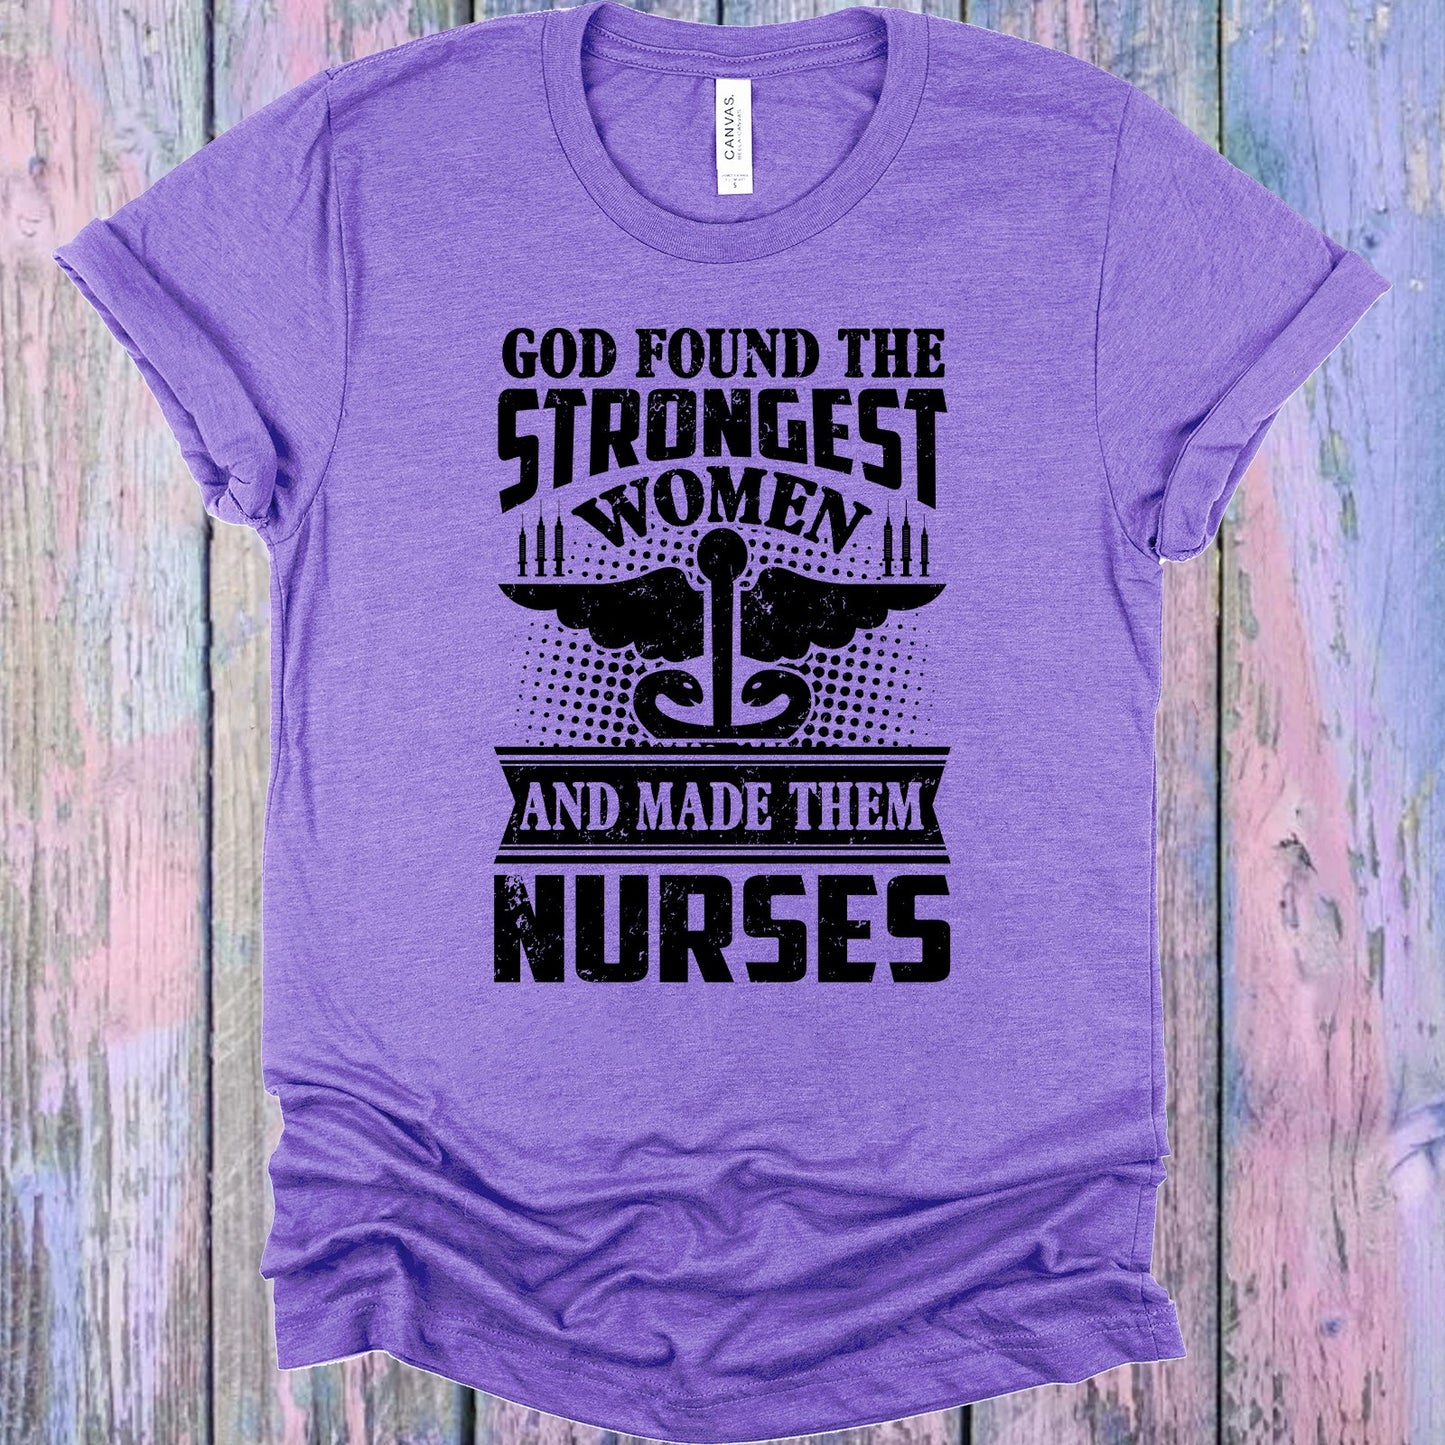 God Found The Strongest Women And Made Them Nurses Graphic Tee Graphic Tee